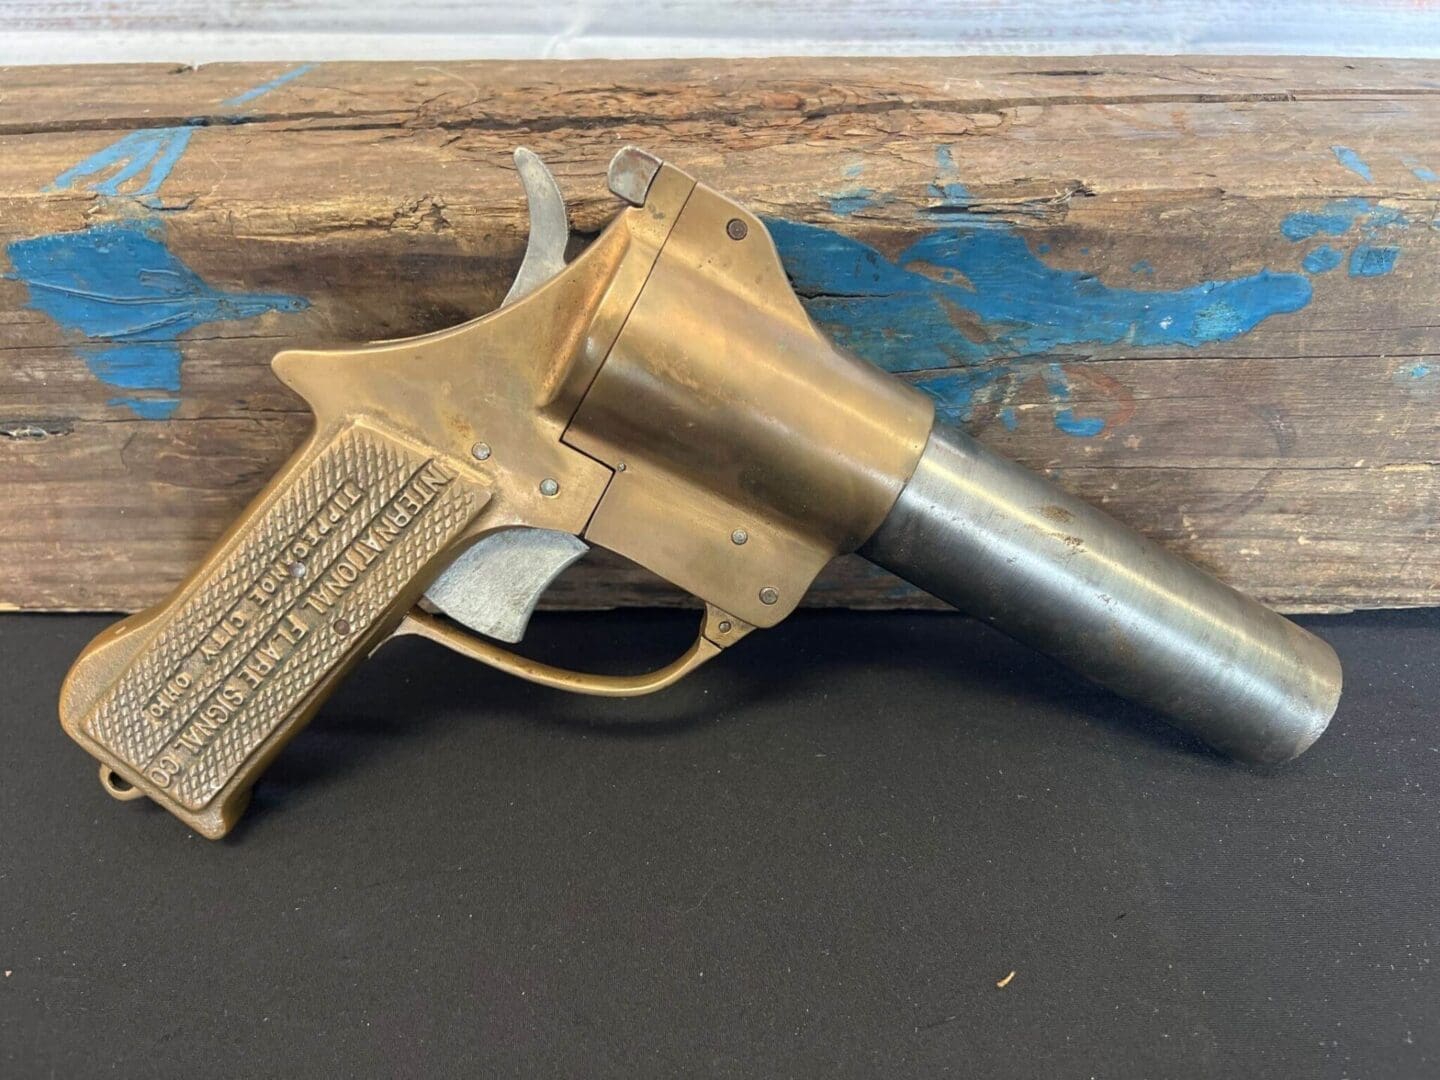 A flare gun # 3 sitting on top of a piece of wood.